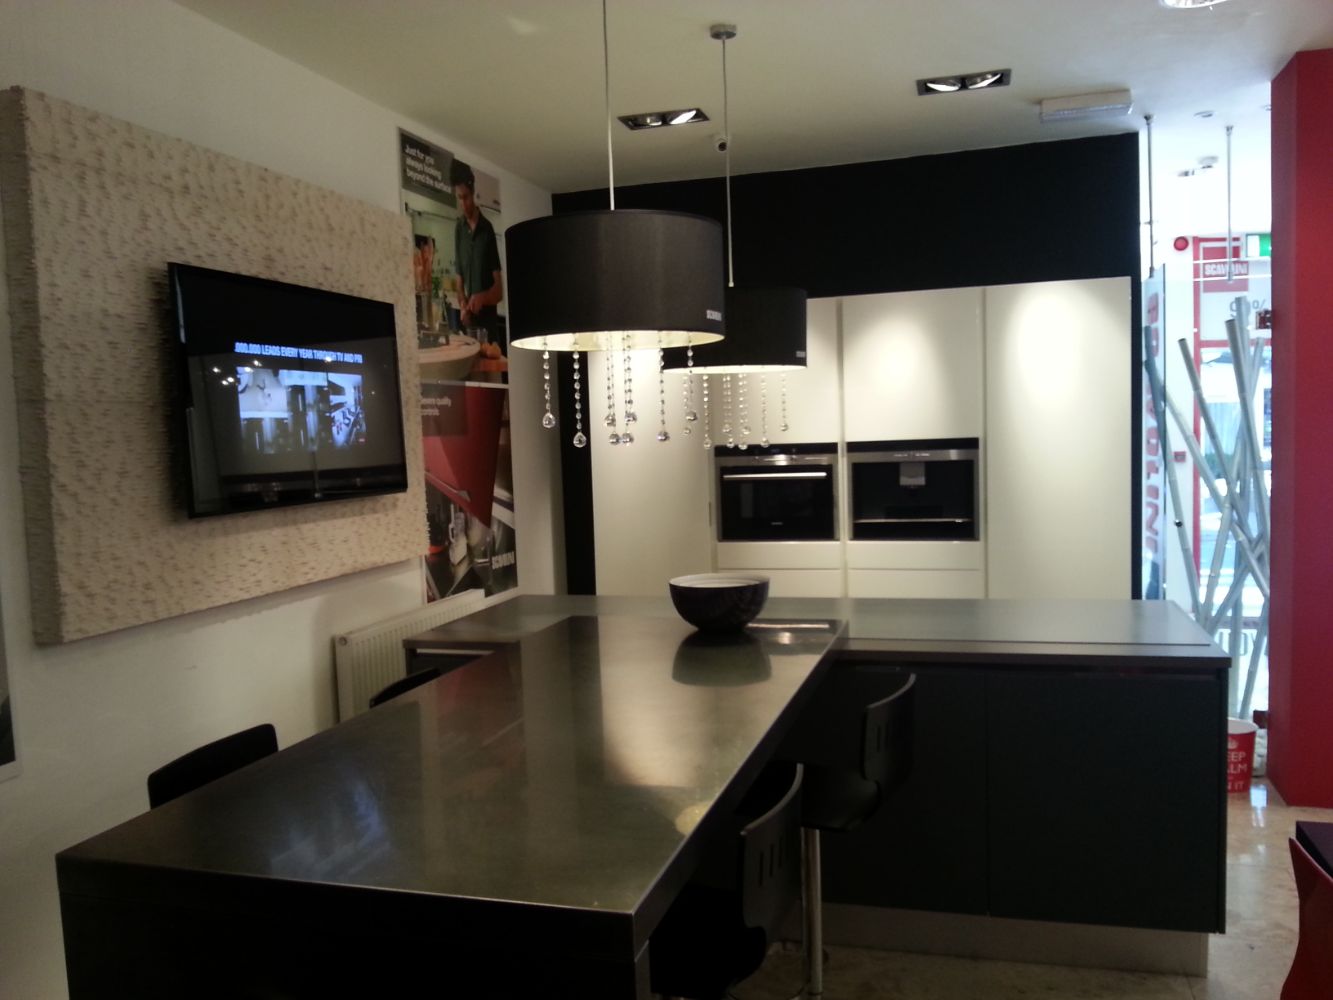 Off site sale of Scavolini Kitchen ex showroom displays with appliances, with 10% buyers premium